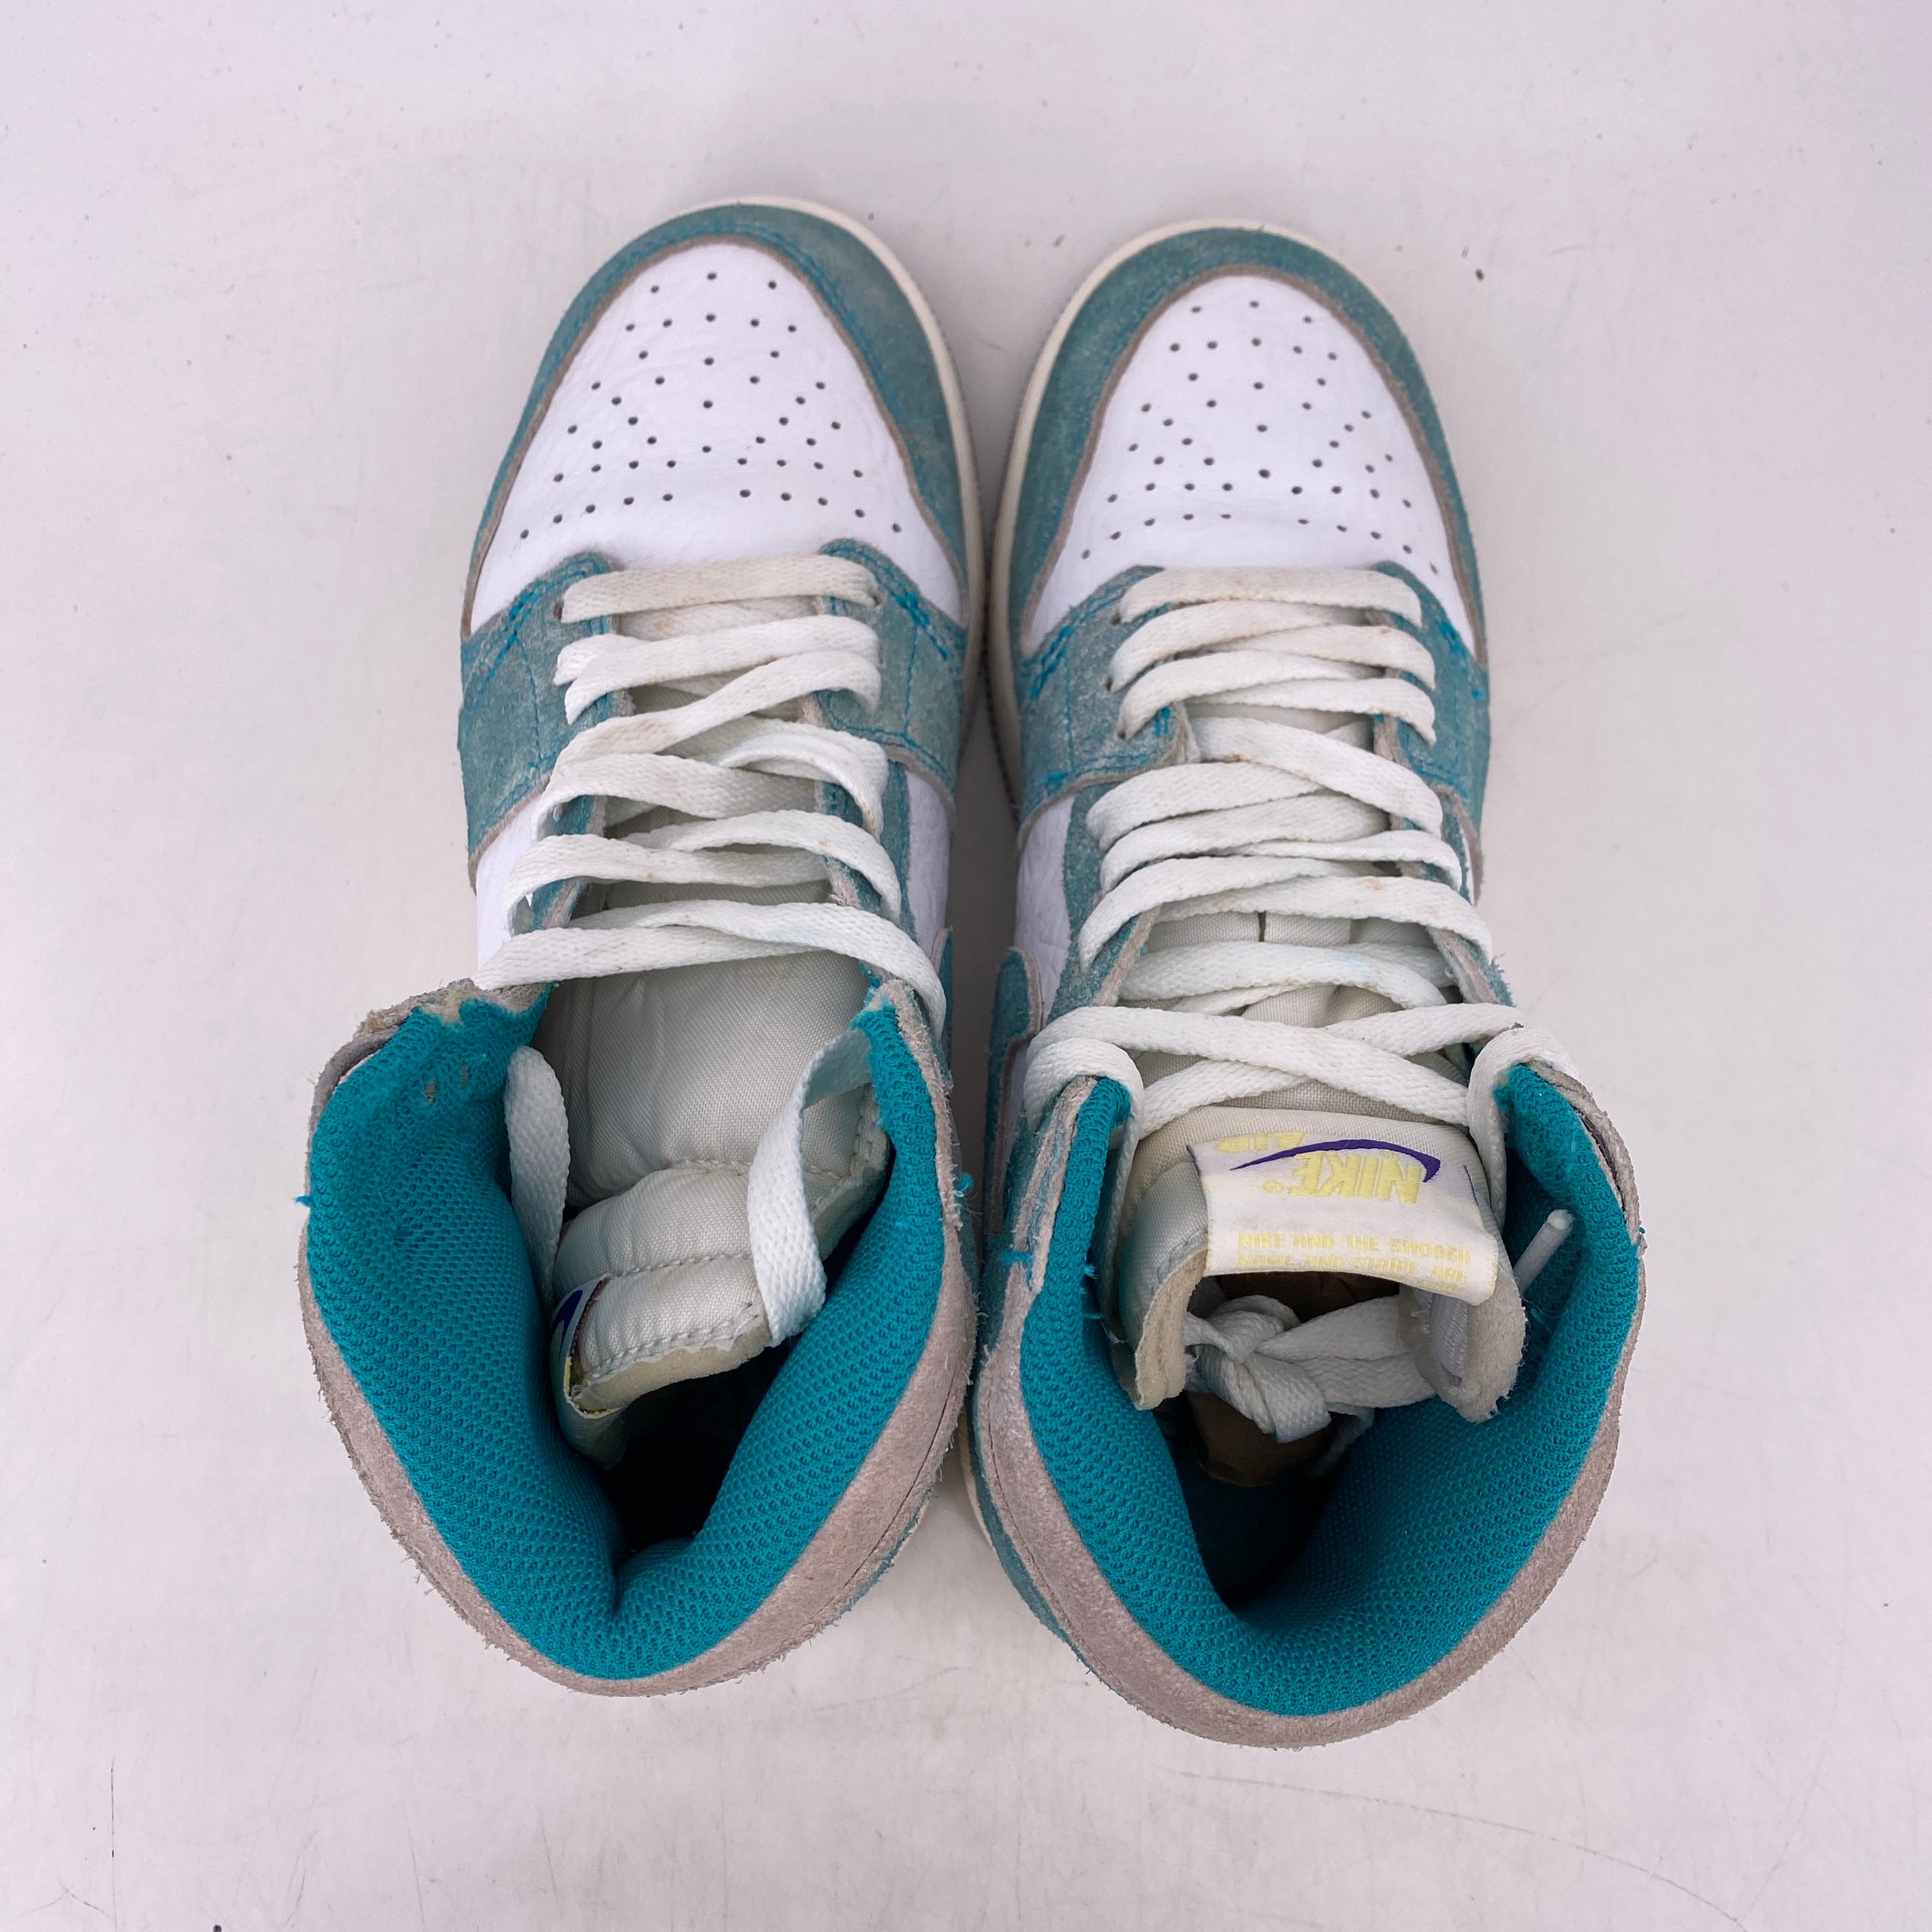 Air Jordan (GS) 1 Retro High OG &quot;Turbo Green&quot; 2019 Used Size 5Y